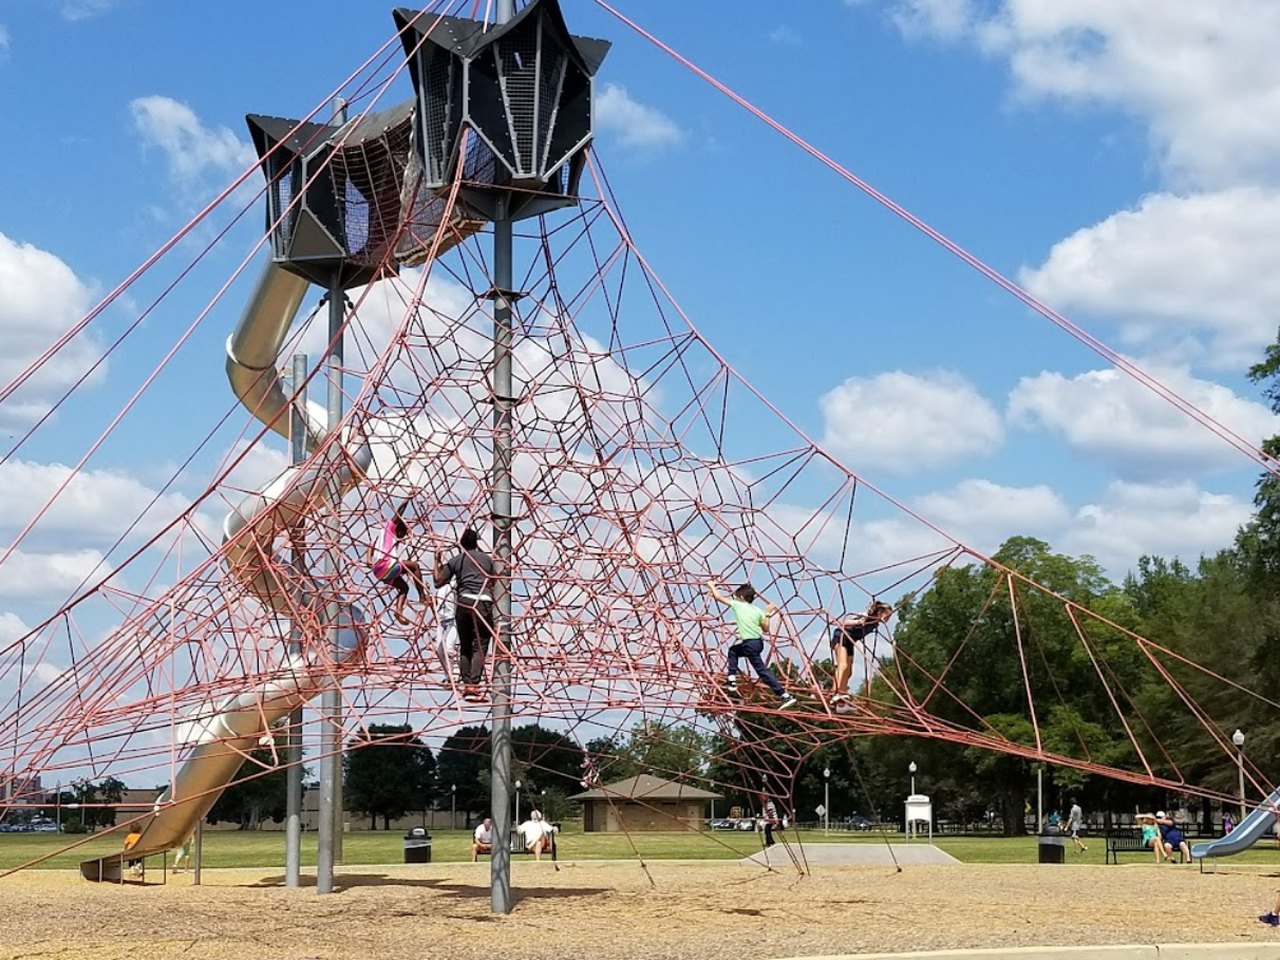  This Giant Jungle Gym Hiding In Alabama Will Bring Out The Adventurer In You 